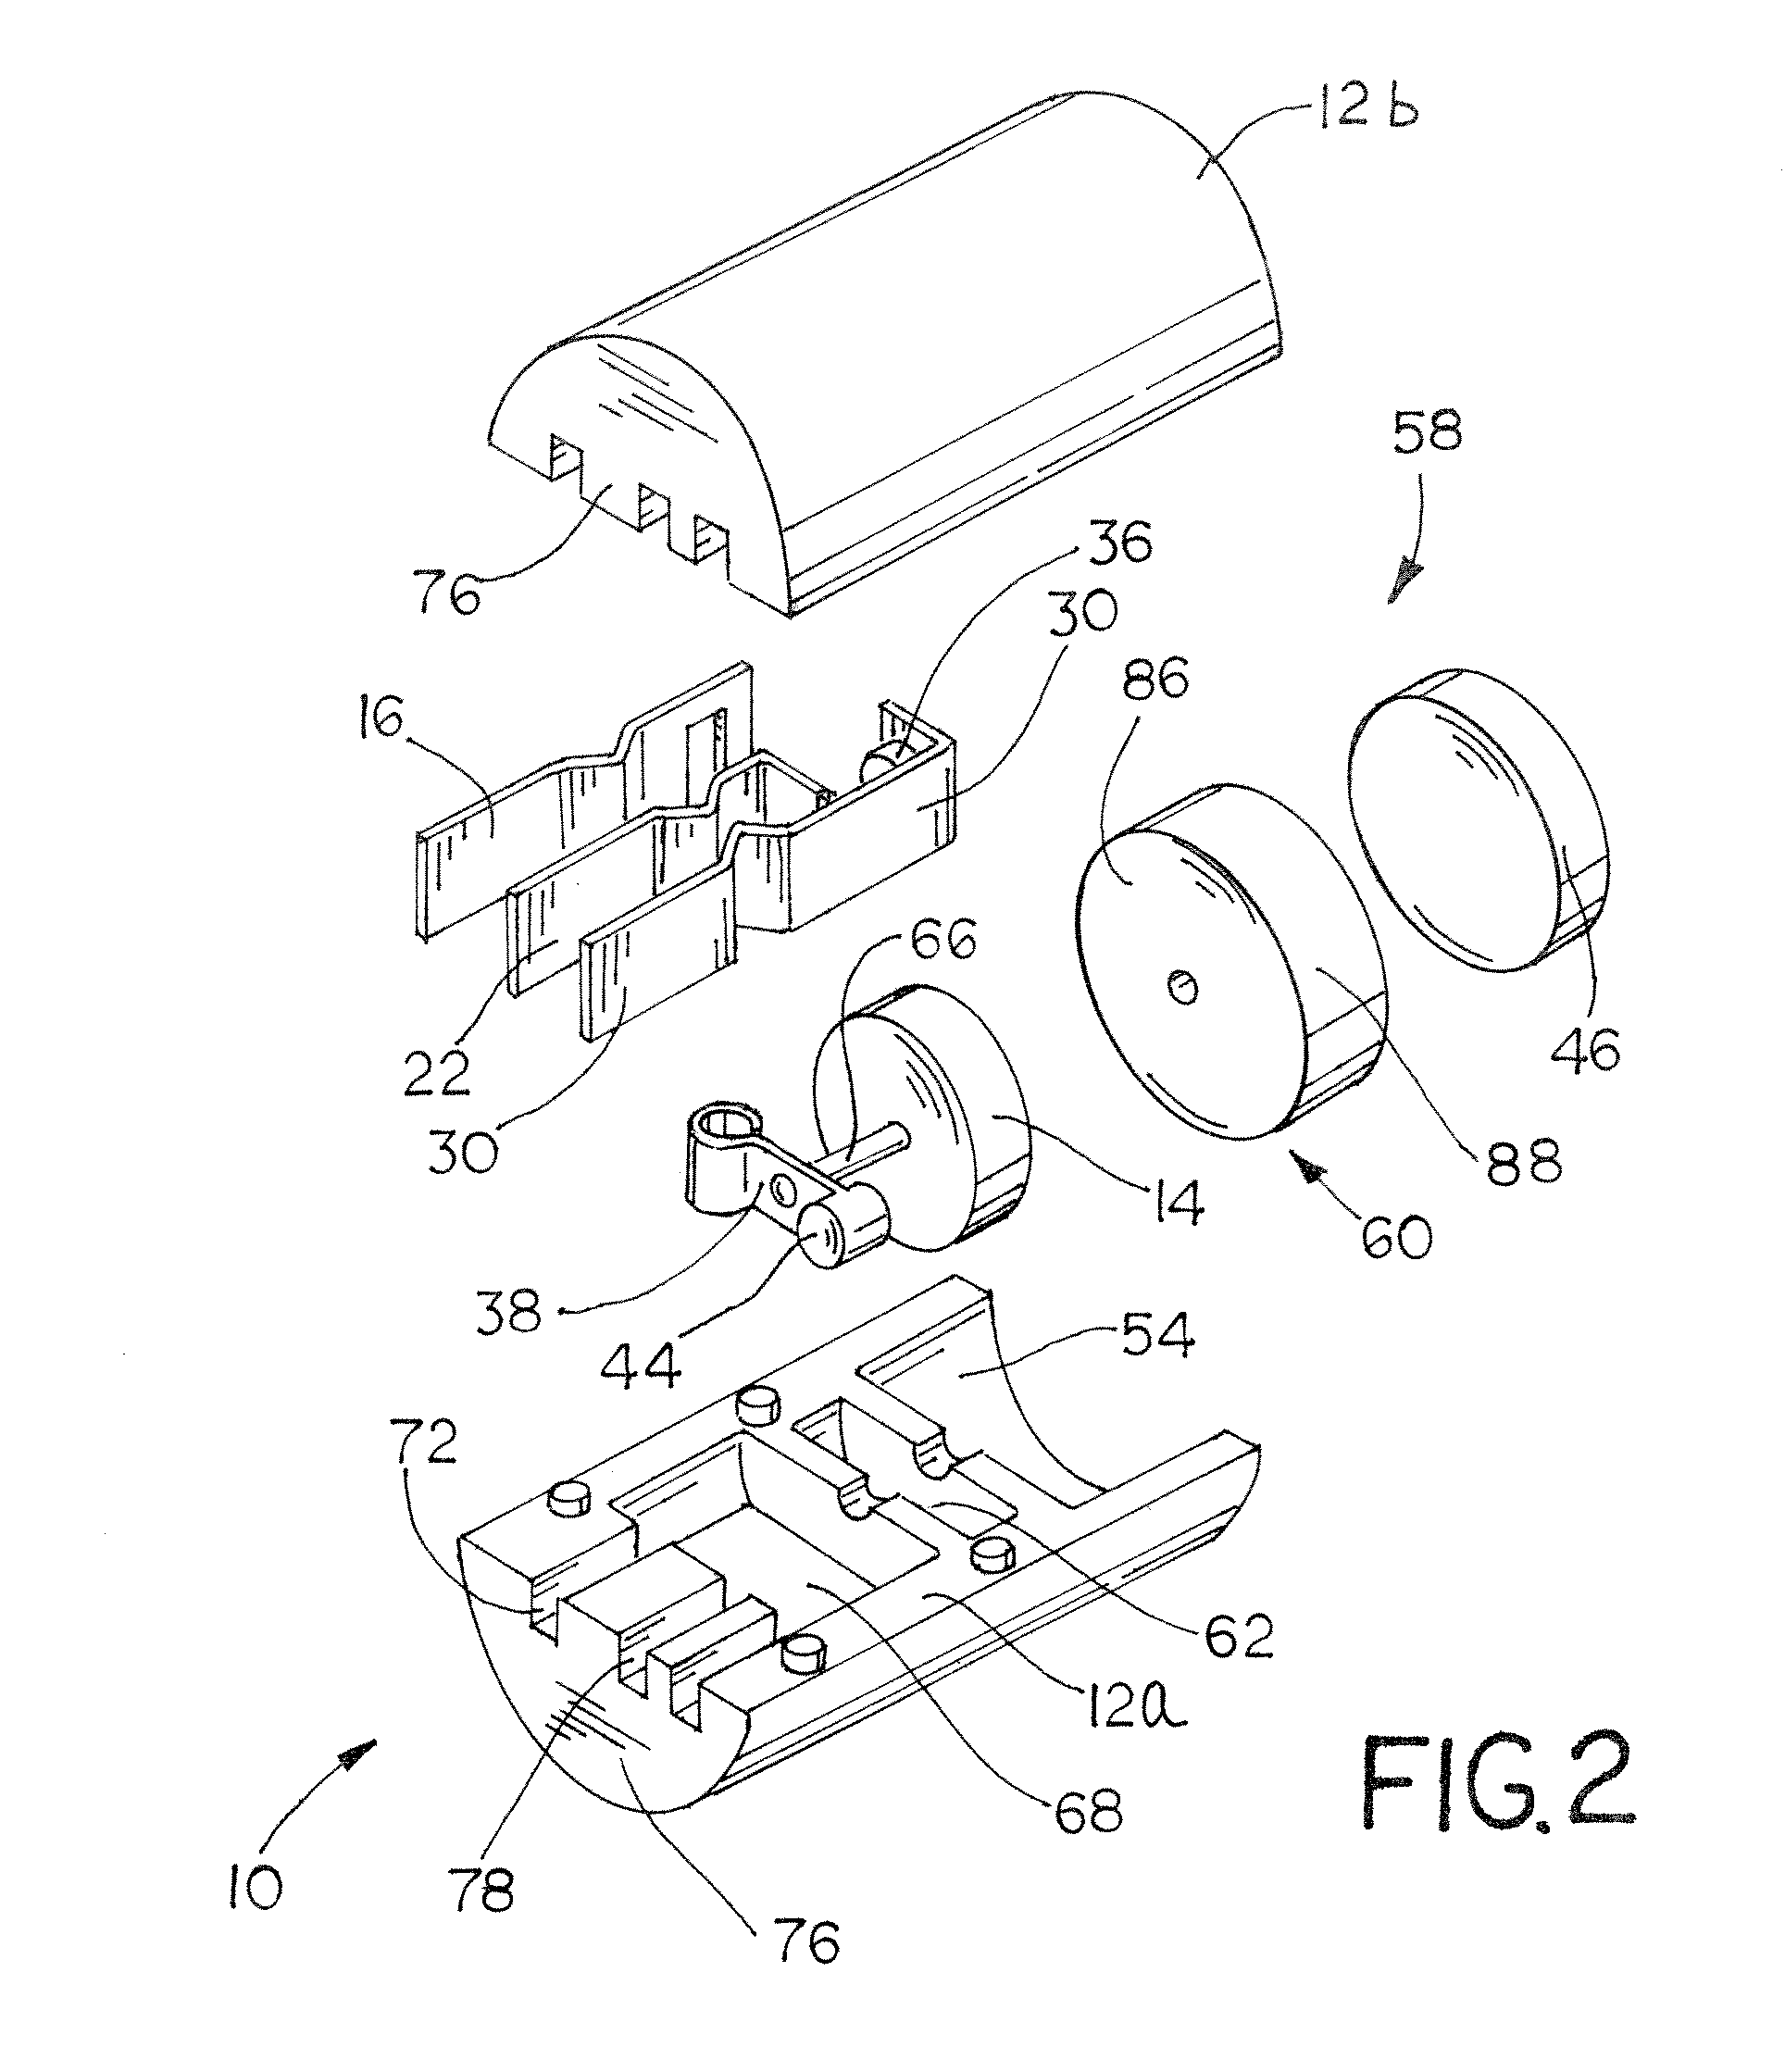 Magnetically-Triggered Proximity Switch